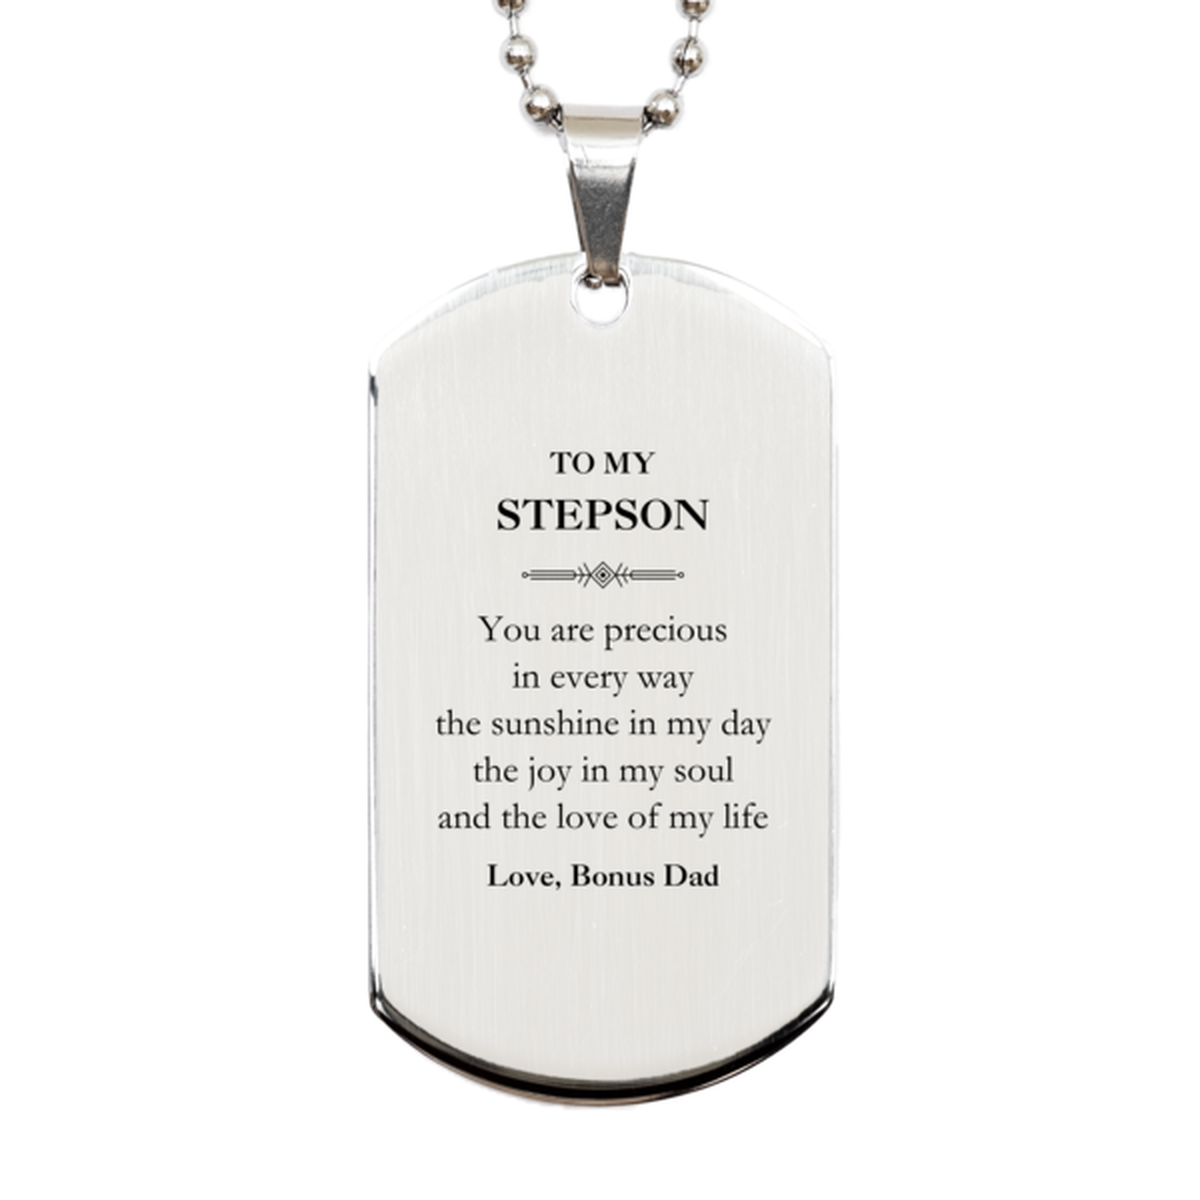 Graduation Gifts for Stepson Silver Dog Tag Present from Bonus Dad, Christmas Stepson Birthday Gifts Stepson You are precious in every way the sunshine in my day. Love, Bonus Dad